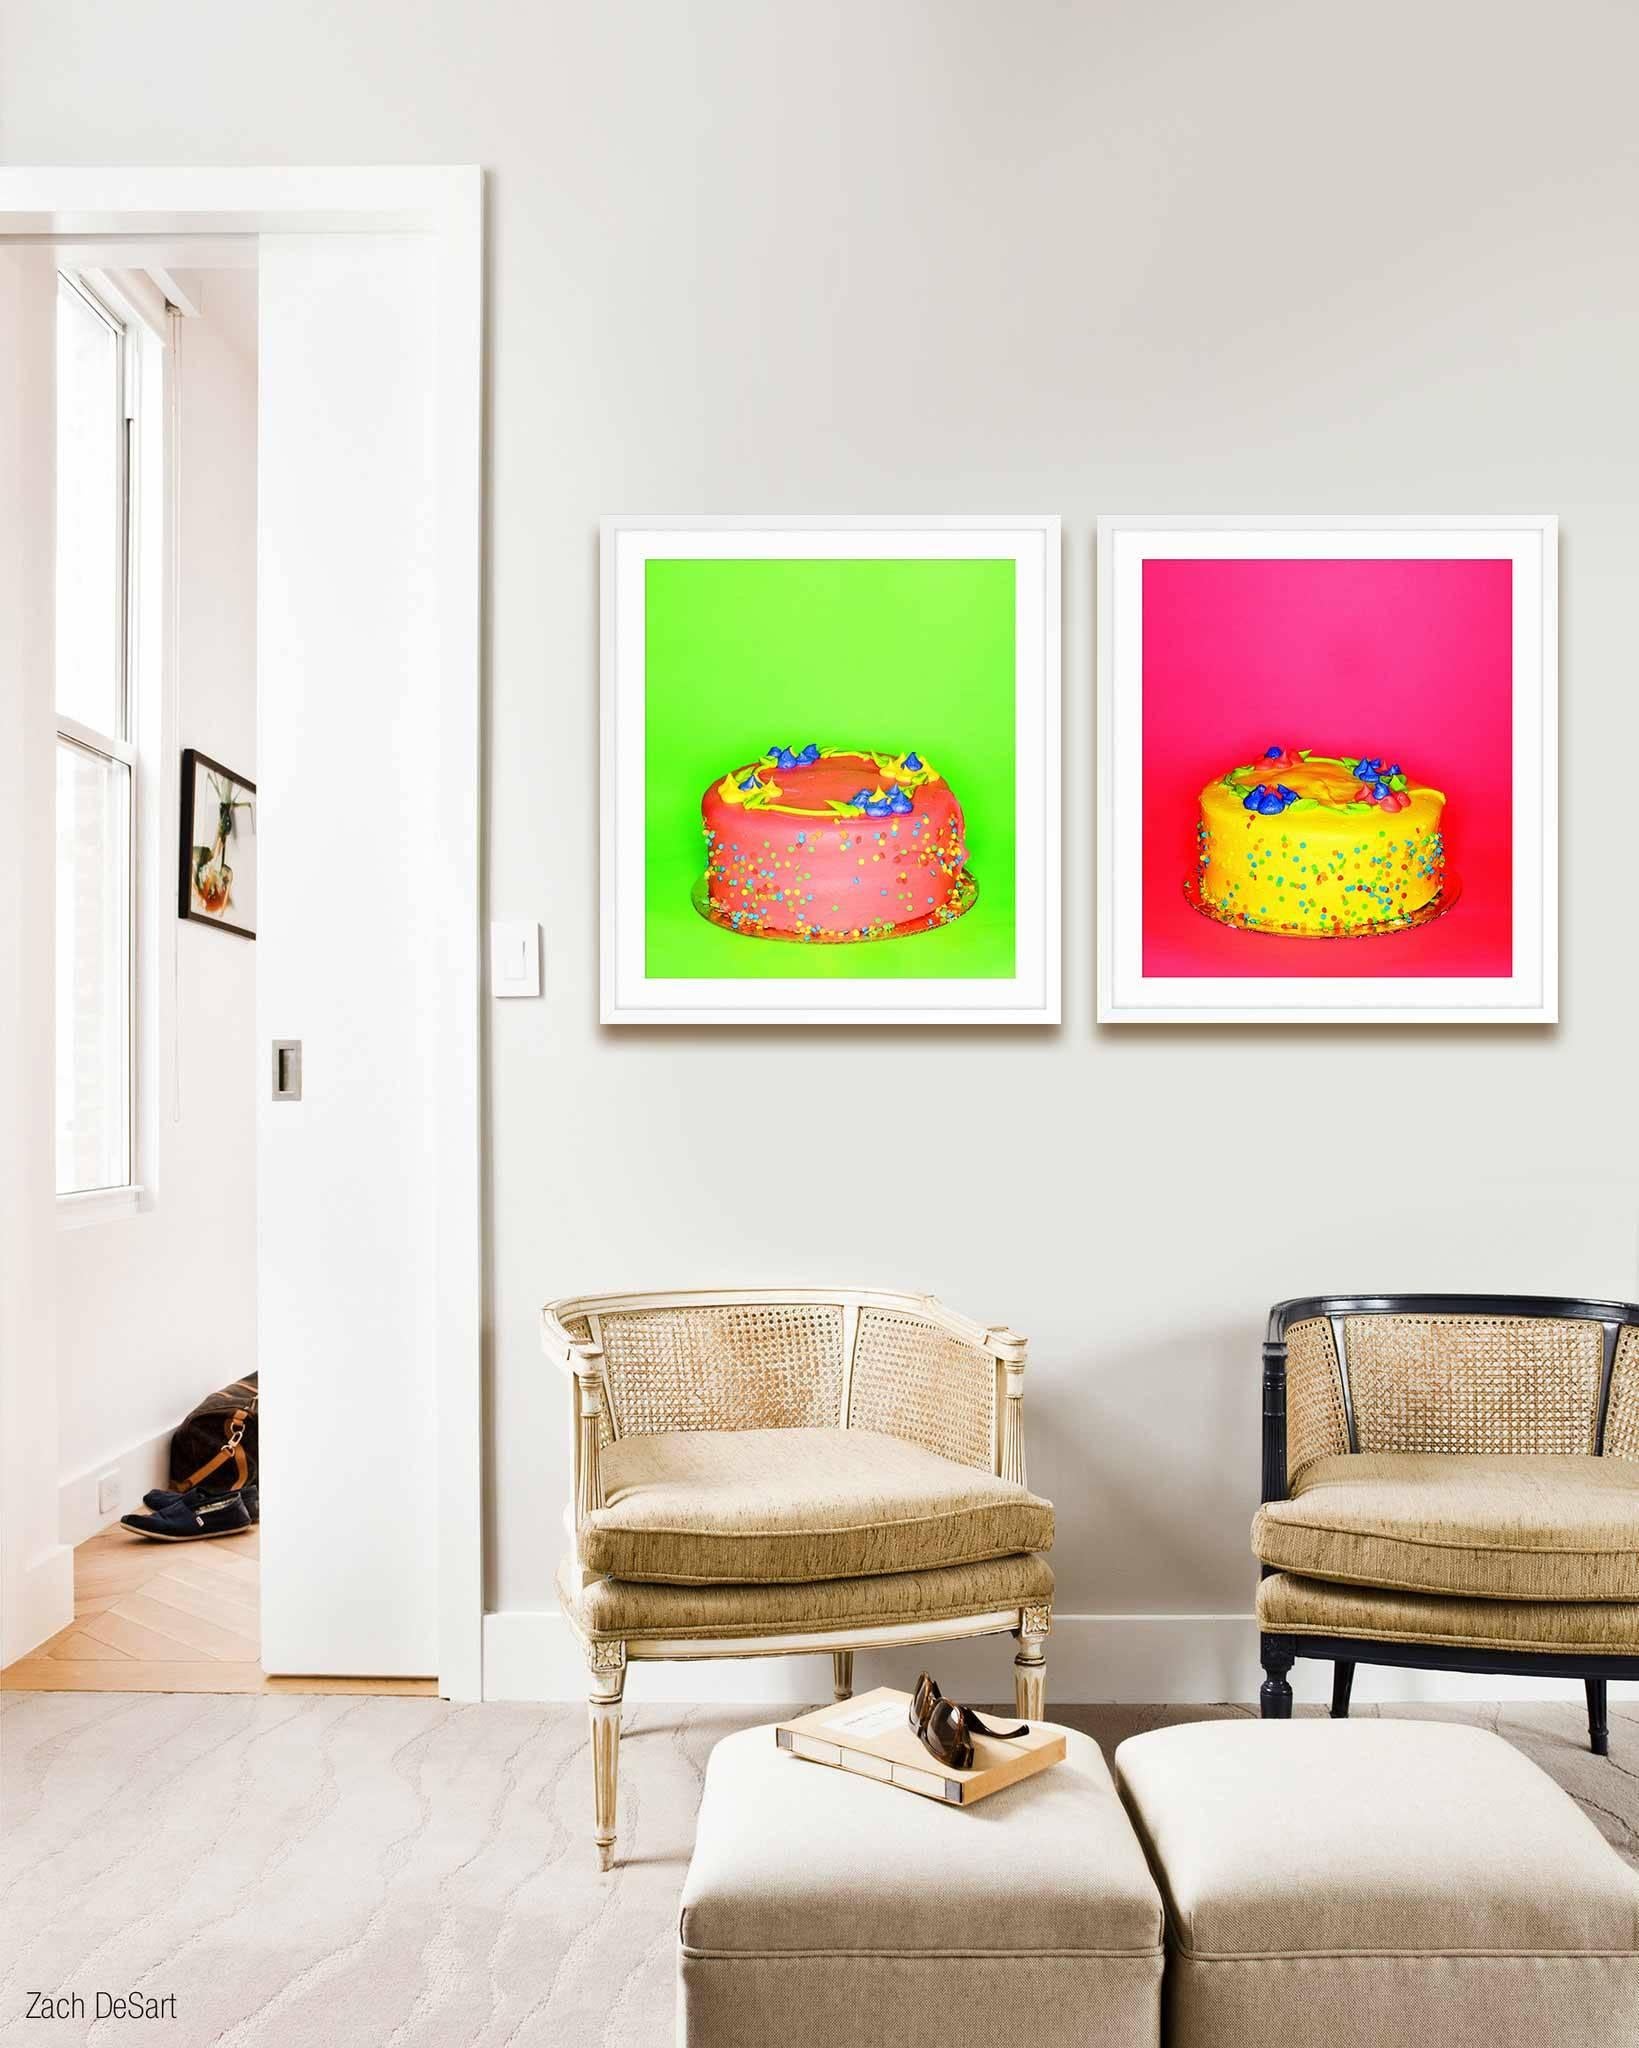 30x40 in, edition 50
Unframed
With the American Sugar series, JM Giordano was really interested in updating Pop Art to our generation, the 18-35ish generation. The work in the series is a reflection of our culture's dependence on sugar and the